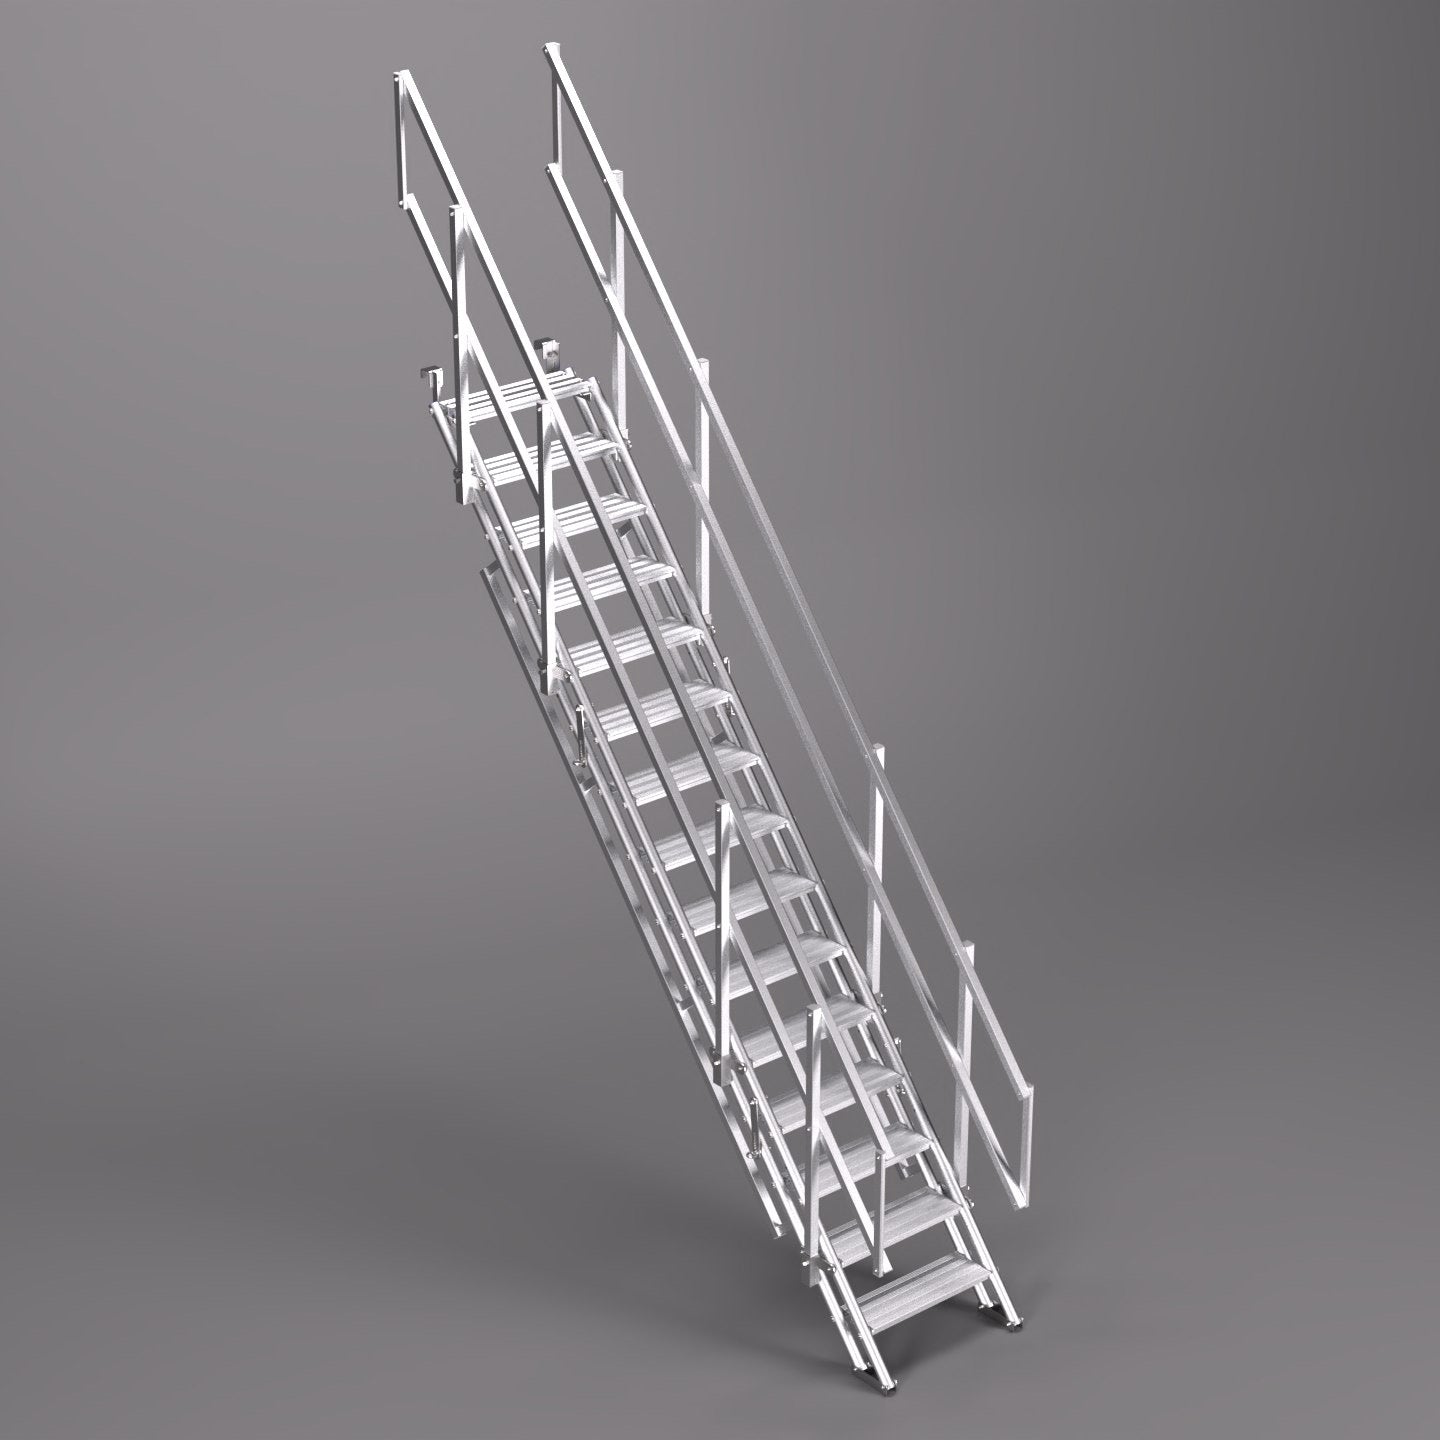 An image of a 3.0m ALTO Universal Stair Set with the scaffold tube hook option.